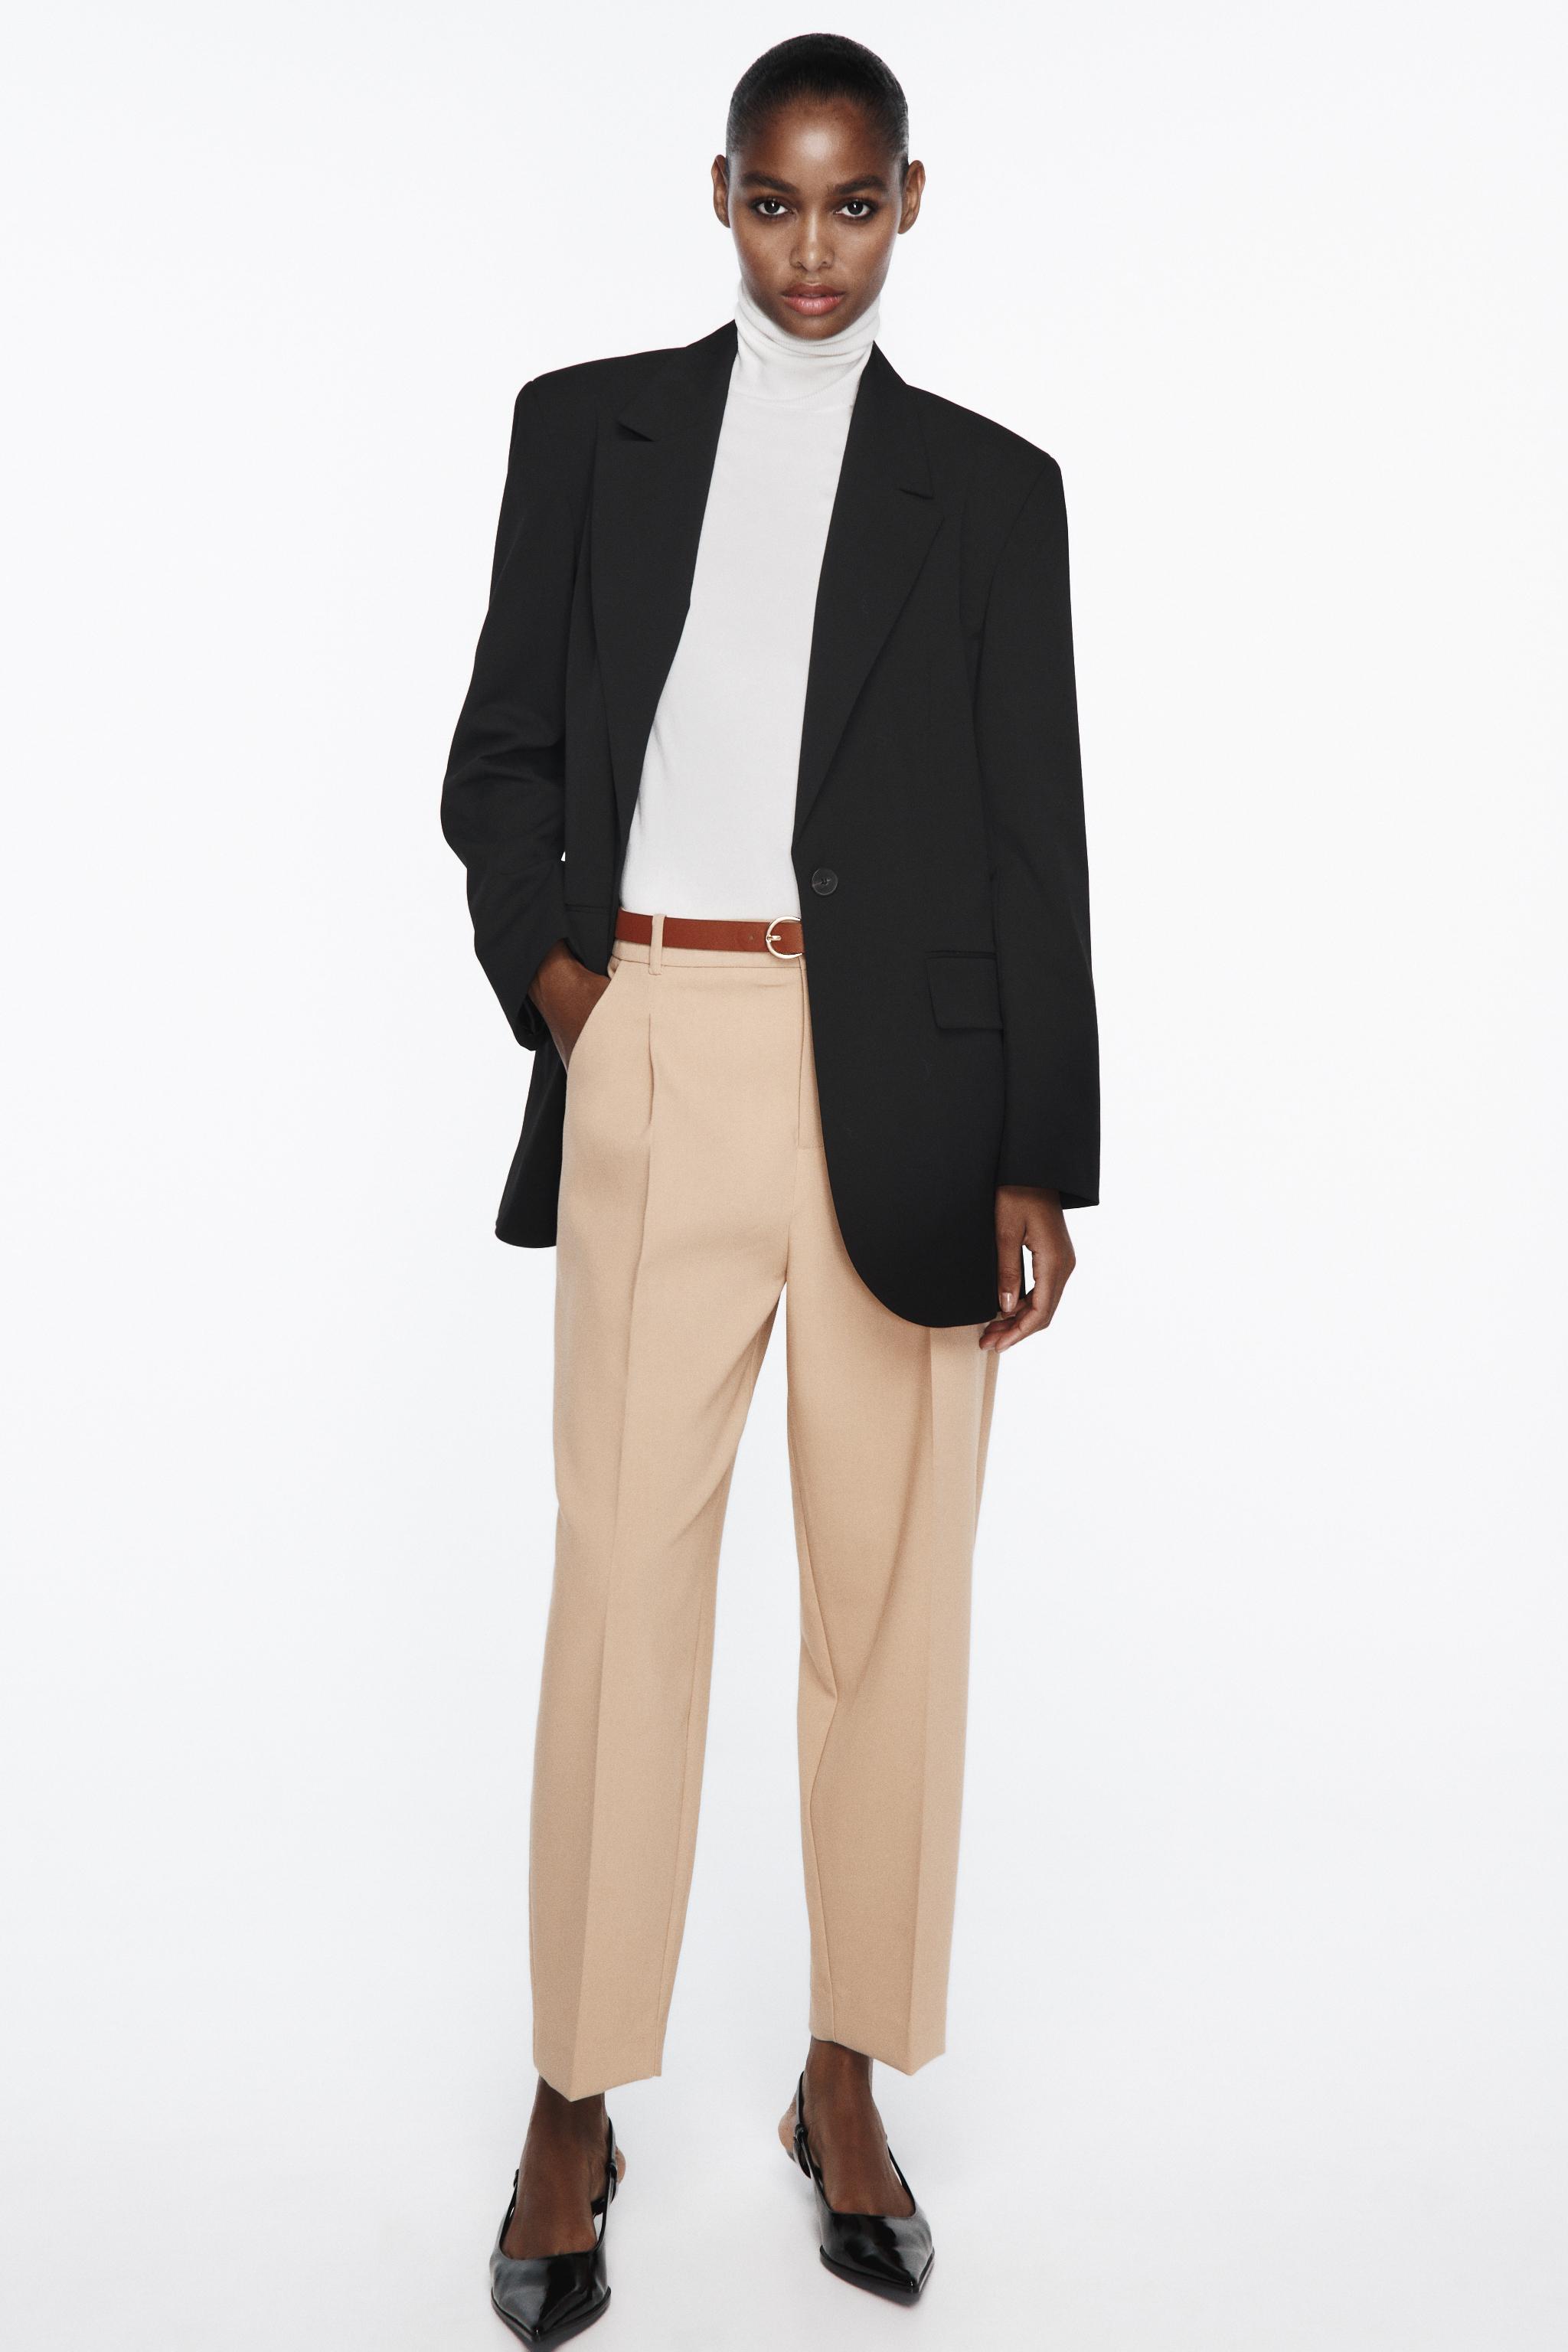 TROUSERS WITH LINED BELT - Beige